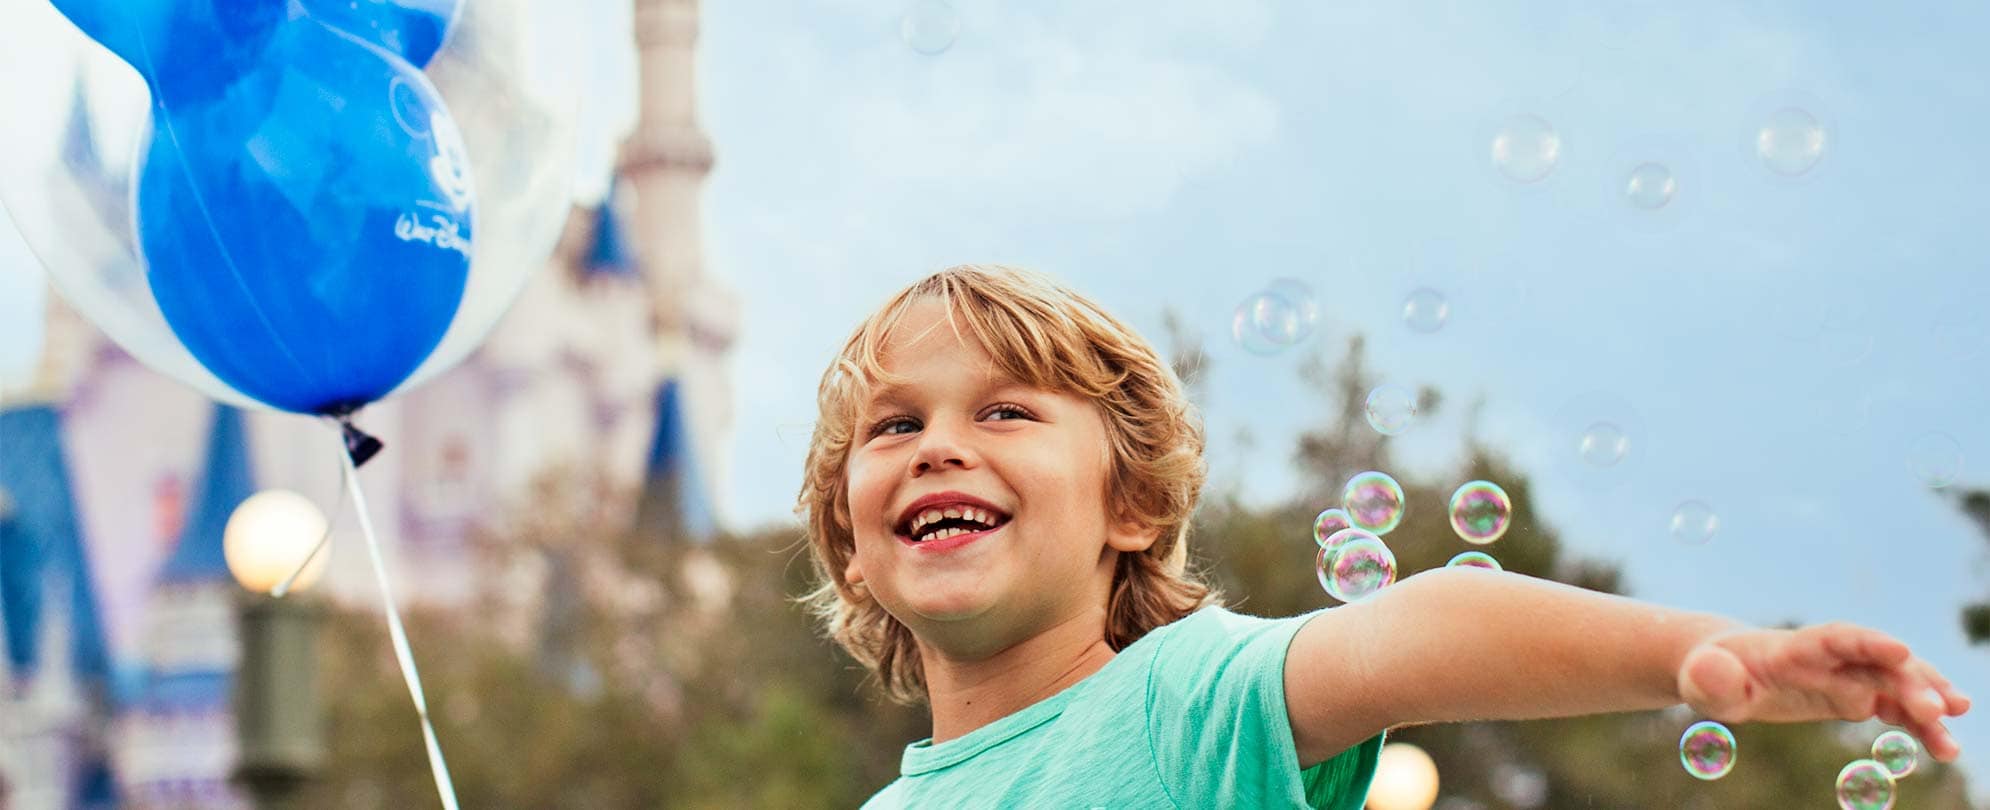 A smiling young boy surrounded by bubble holds a Mickey Mouse balloon at Disneyland in Anaheim, California.